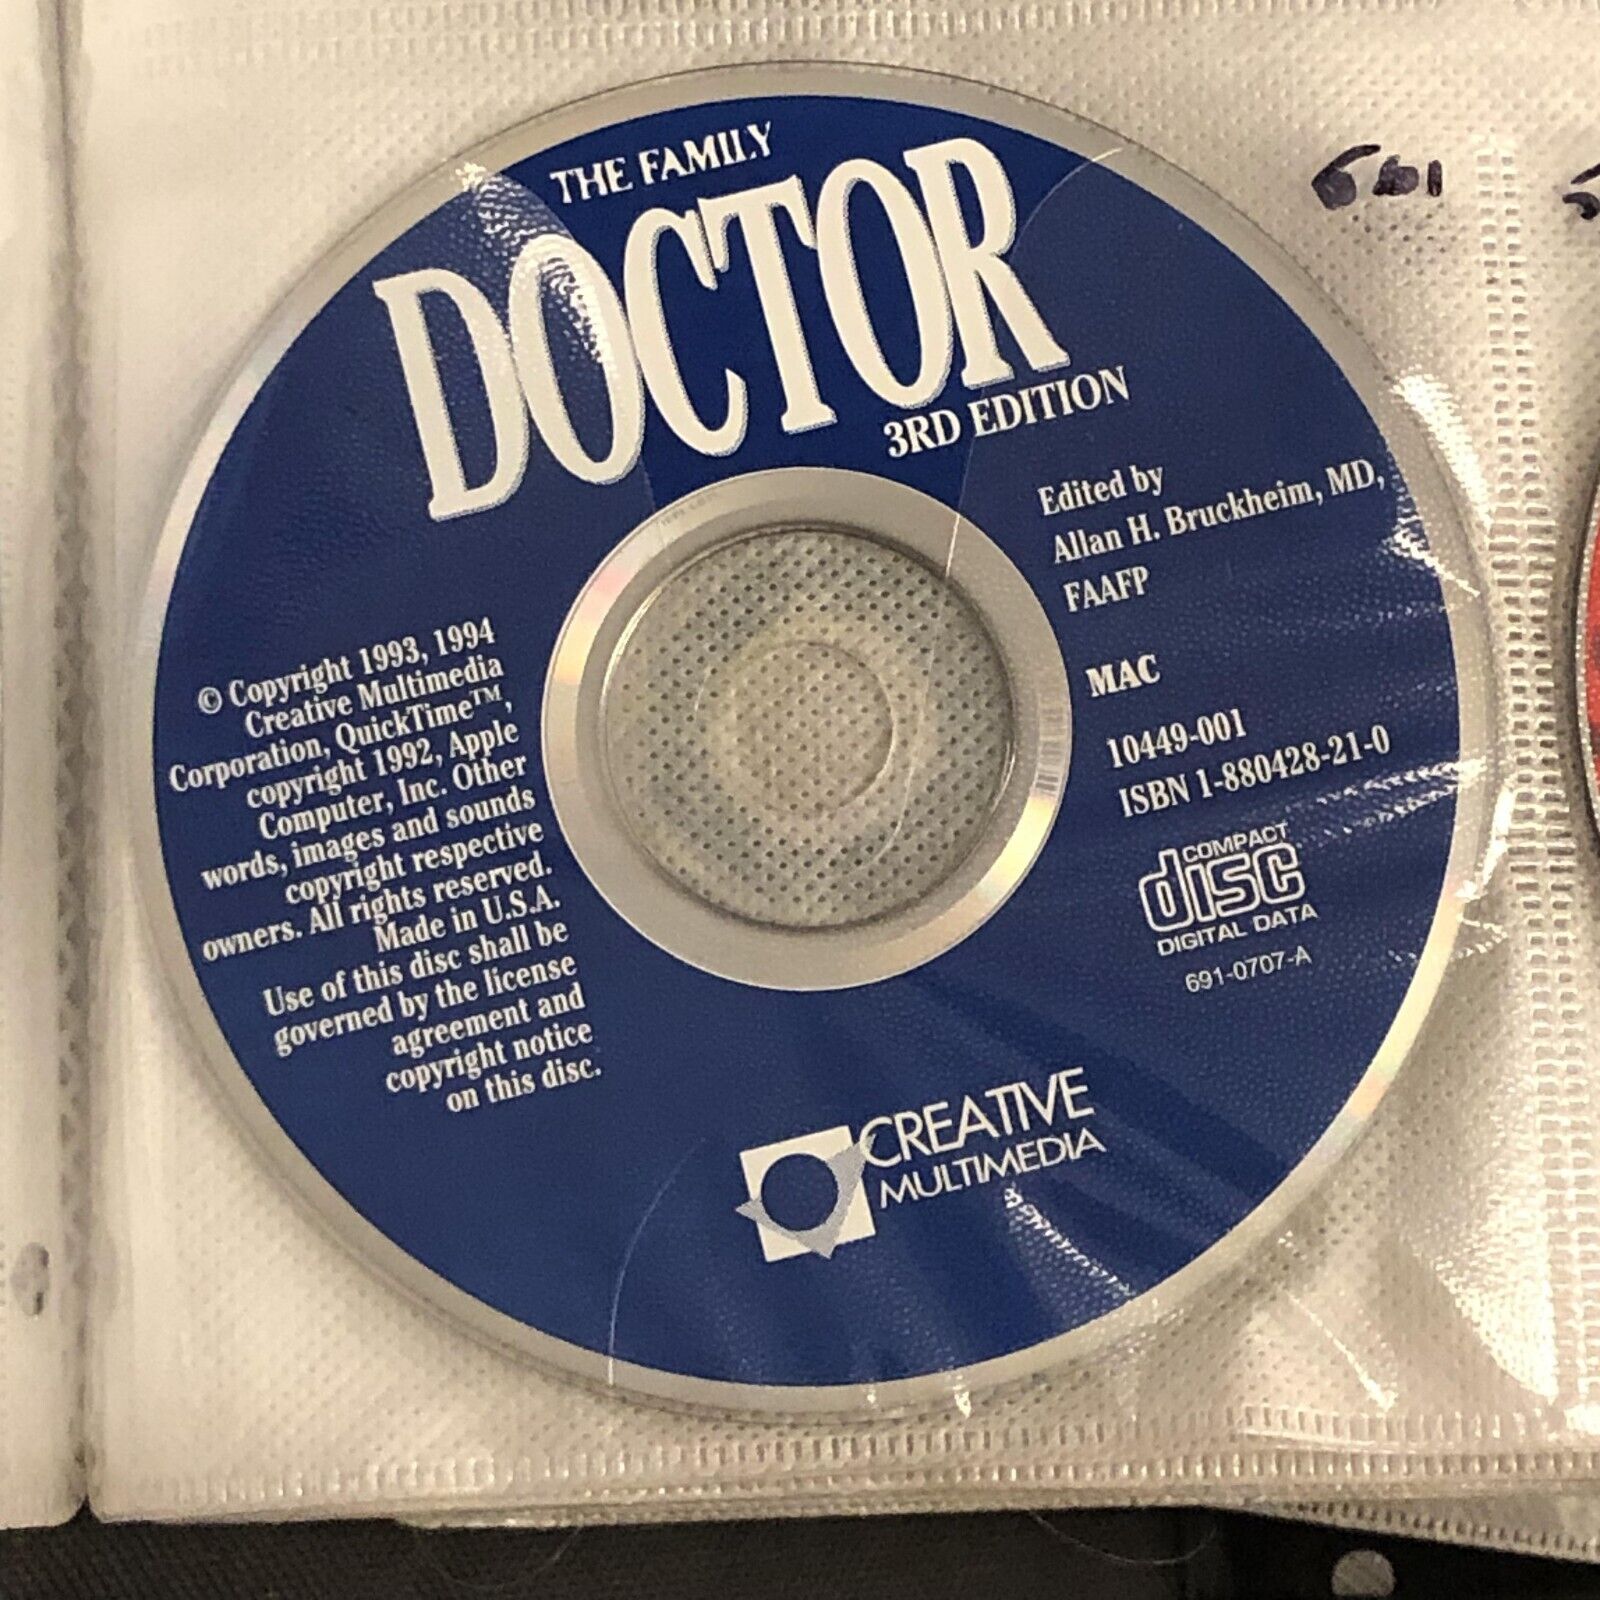 The Family Doctor 1993 3rd Edition by Creative Multimedia CD-ROM Mac